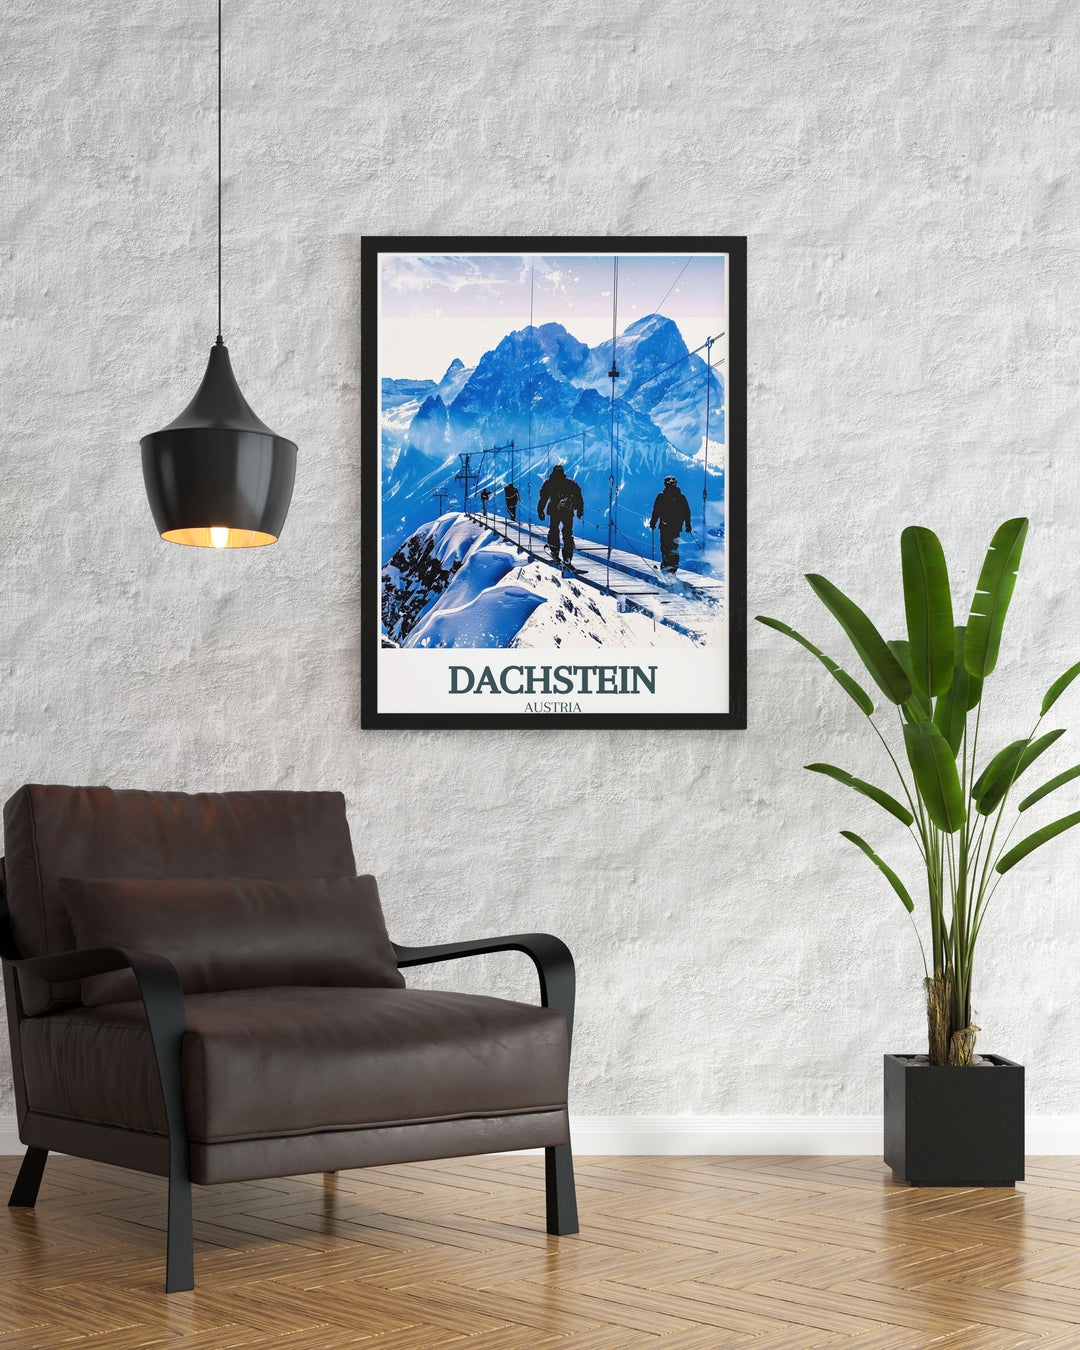 Detailed Dachstein Skywalk, Alps poster presenting the awe inspiring scenery of Dachstein Mountain making it an excellent addition to any art collection and a striking focal point for home decor.